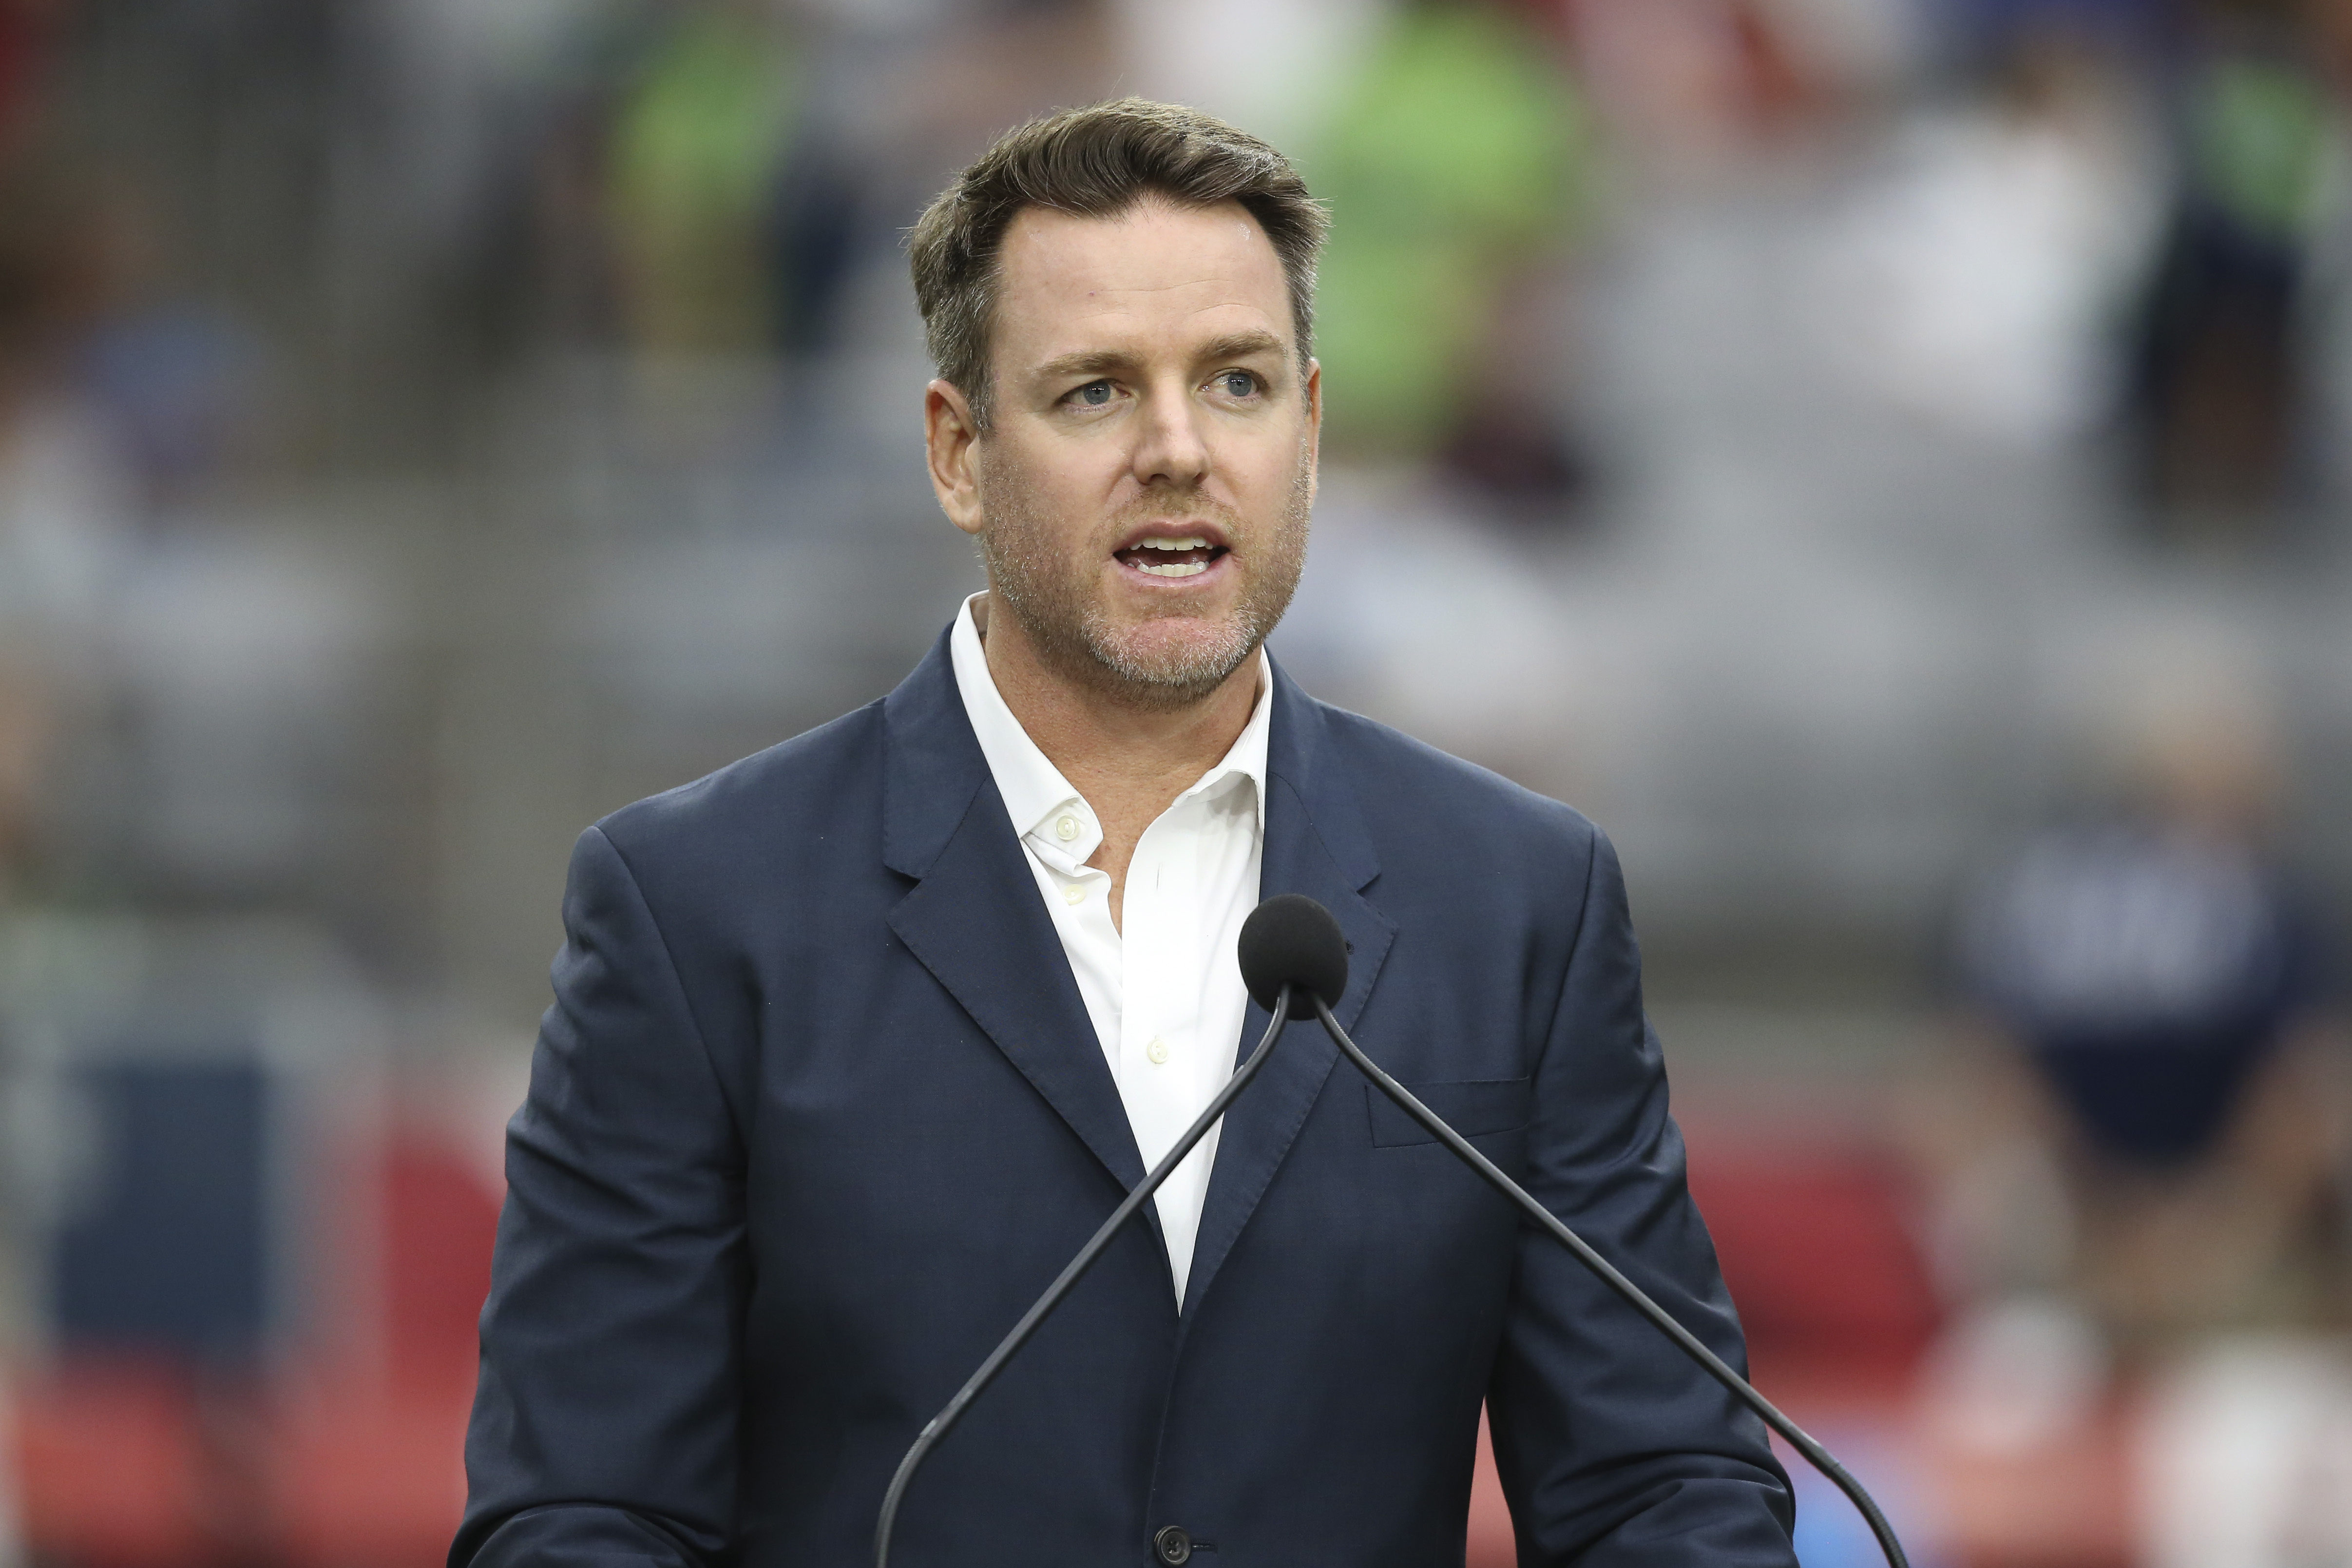 USC Legend Carson Palmer Says Steelers' Mike Tomlin Could Be 'Wild Card' for HC ..